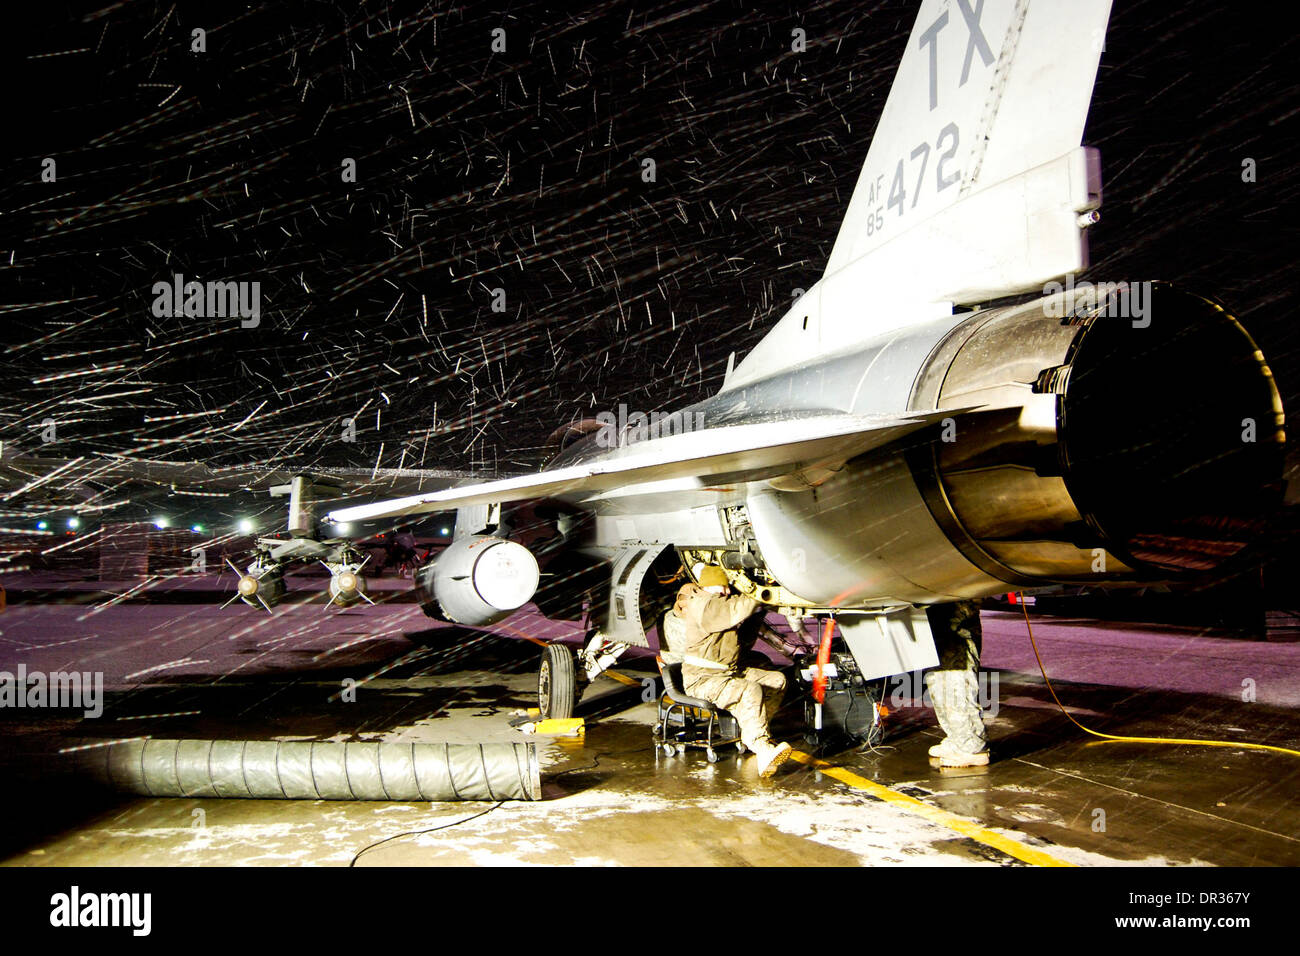 U.S. Air Force maintenance team works on an F-16 Fighting Falcon aircraft during a snowstorm at Bagram Airfield in Afghanistan Stock Photo